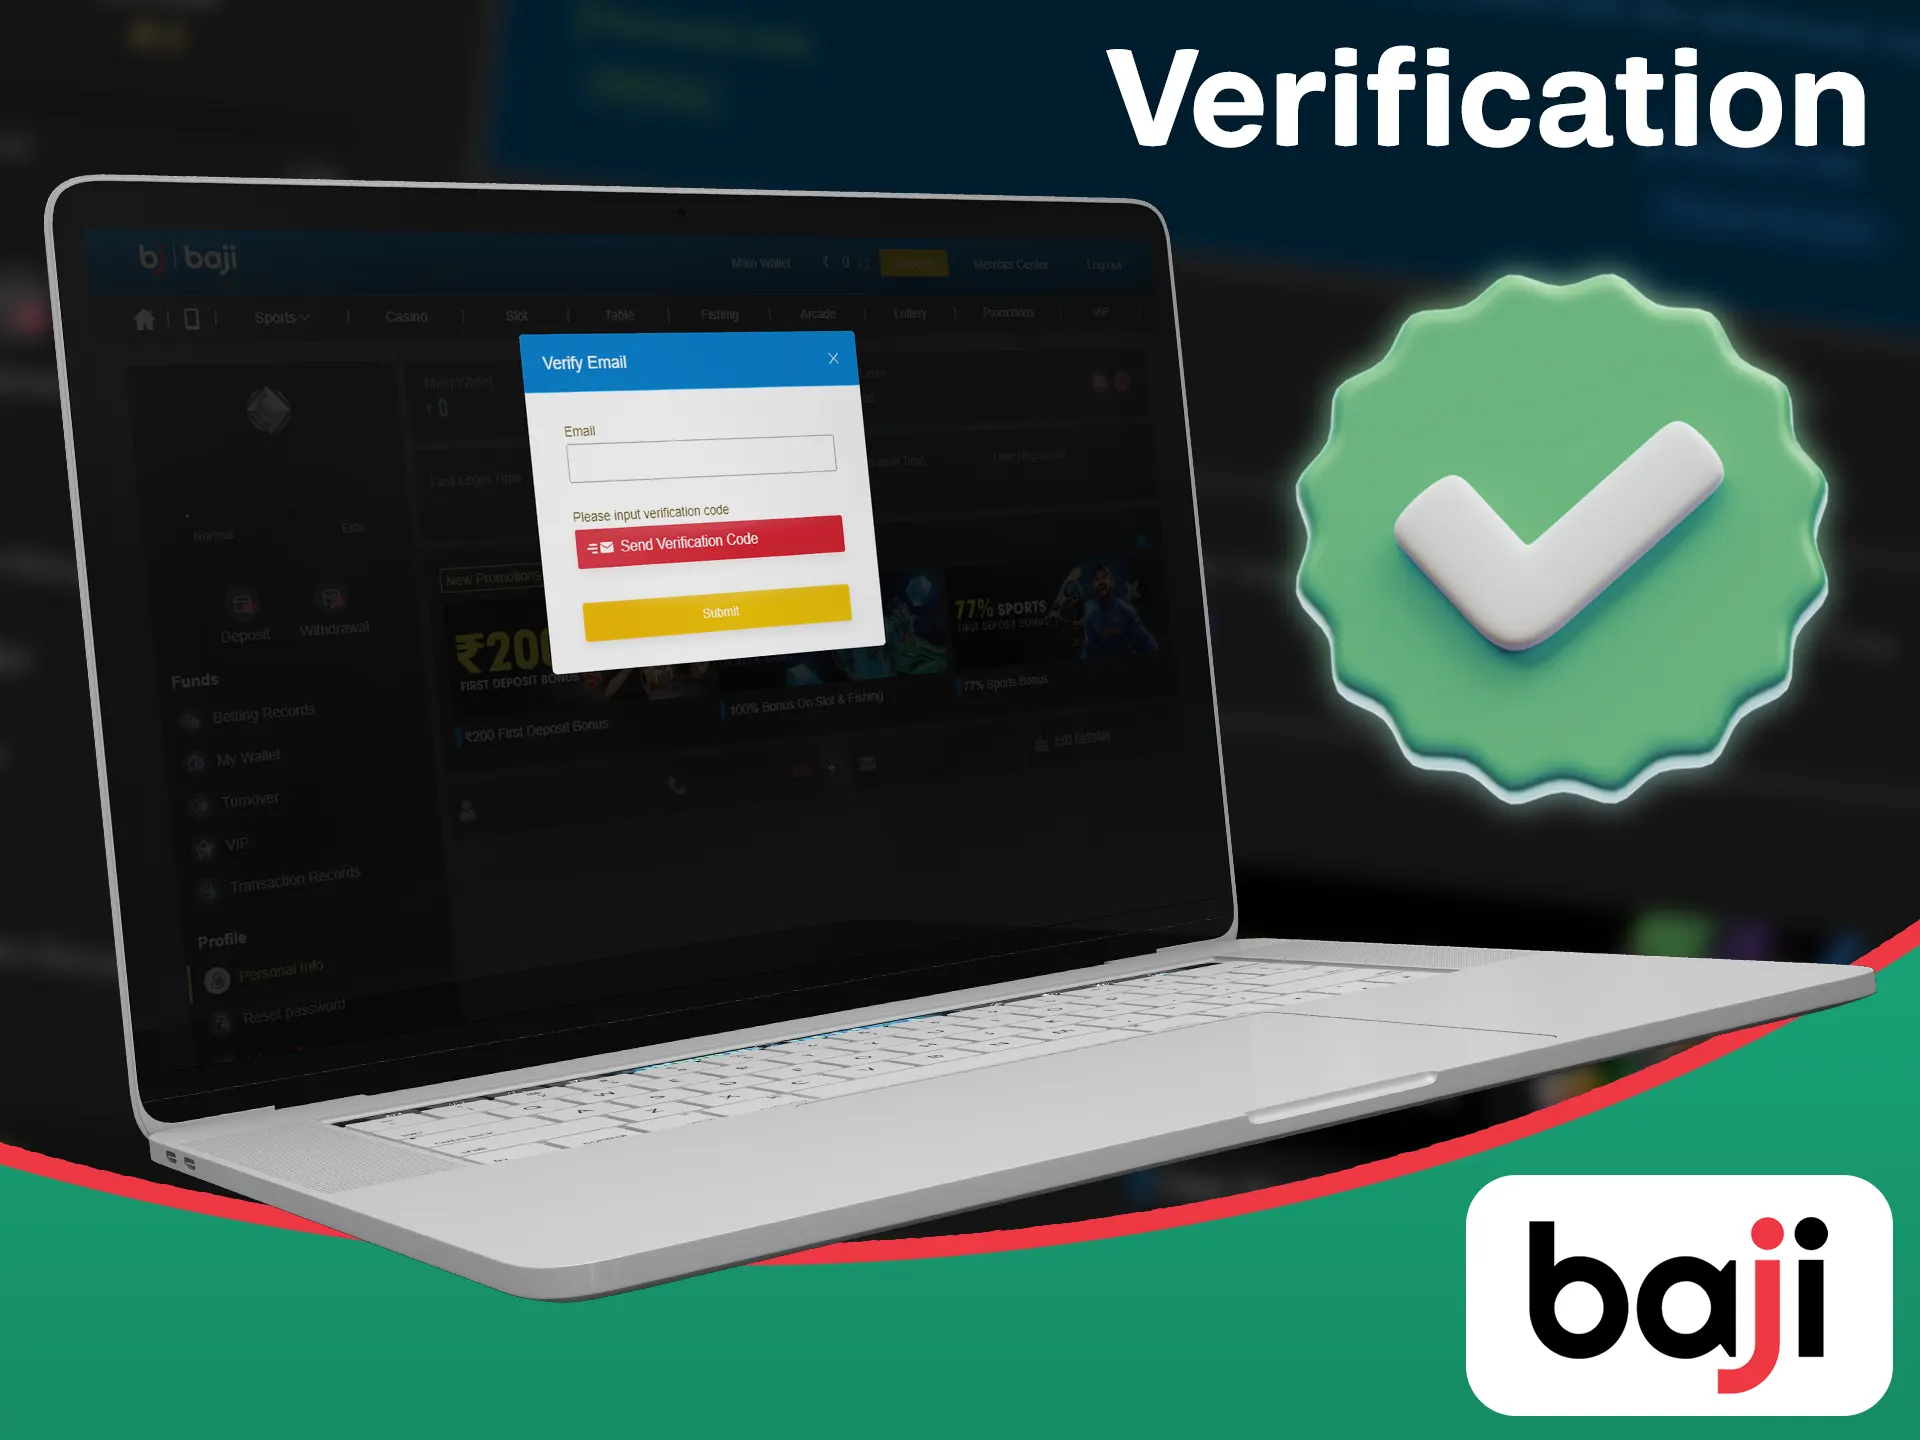 Verify your Baji account by providing the required data.